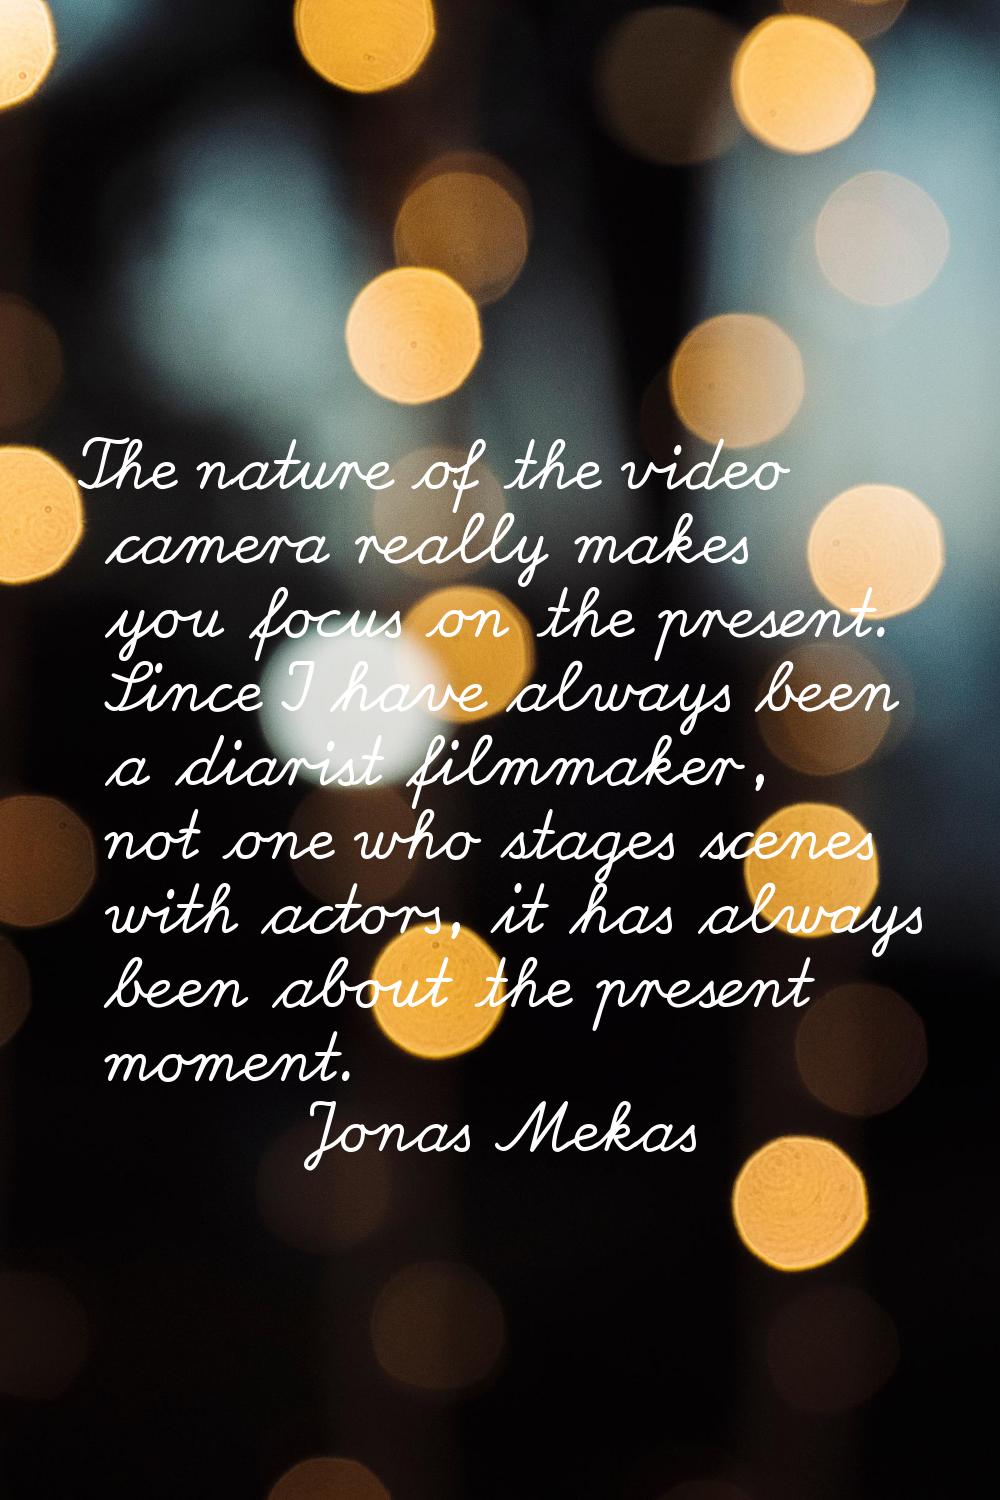 The nature of the video camera really makes you focus on the present. Since I have always been a di